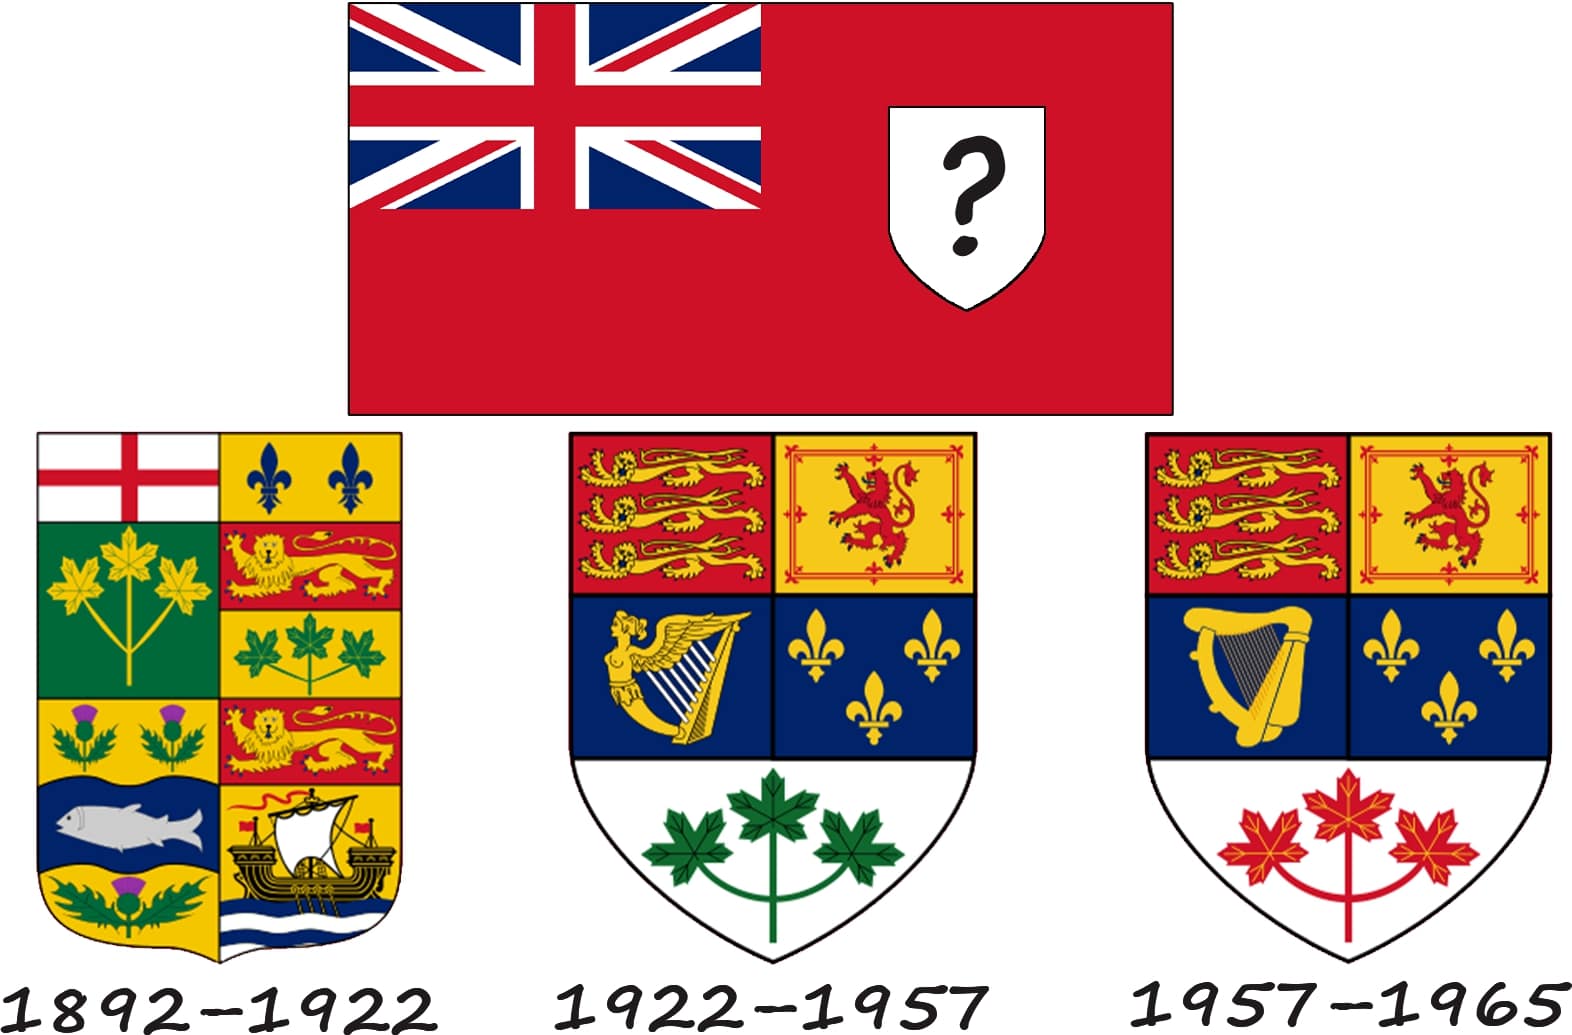 History of the Canadian flag